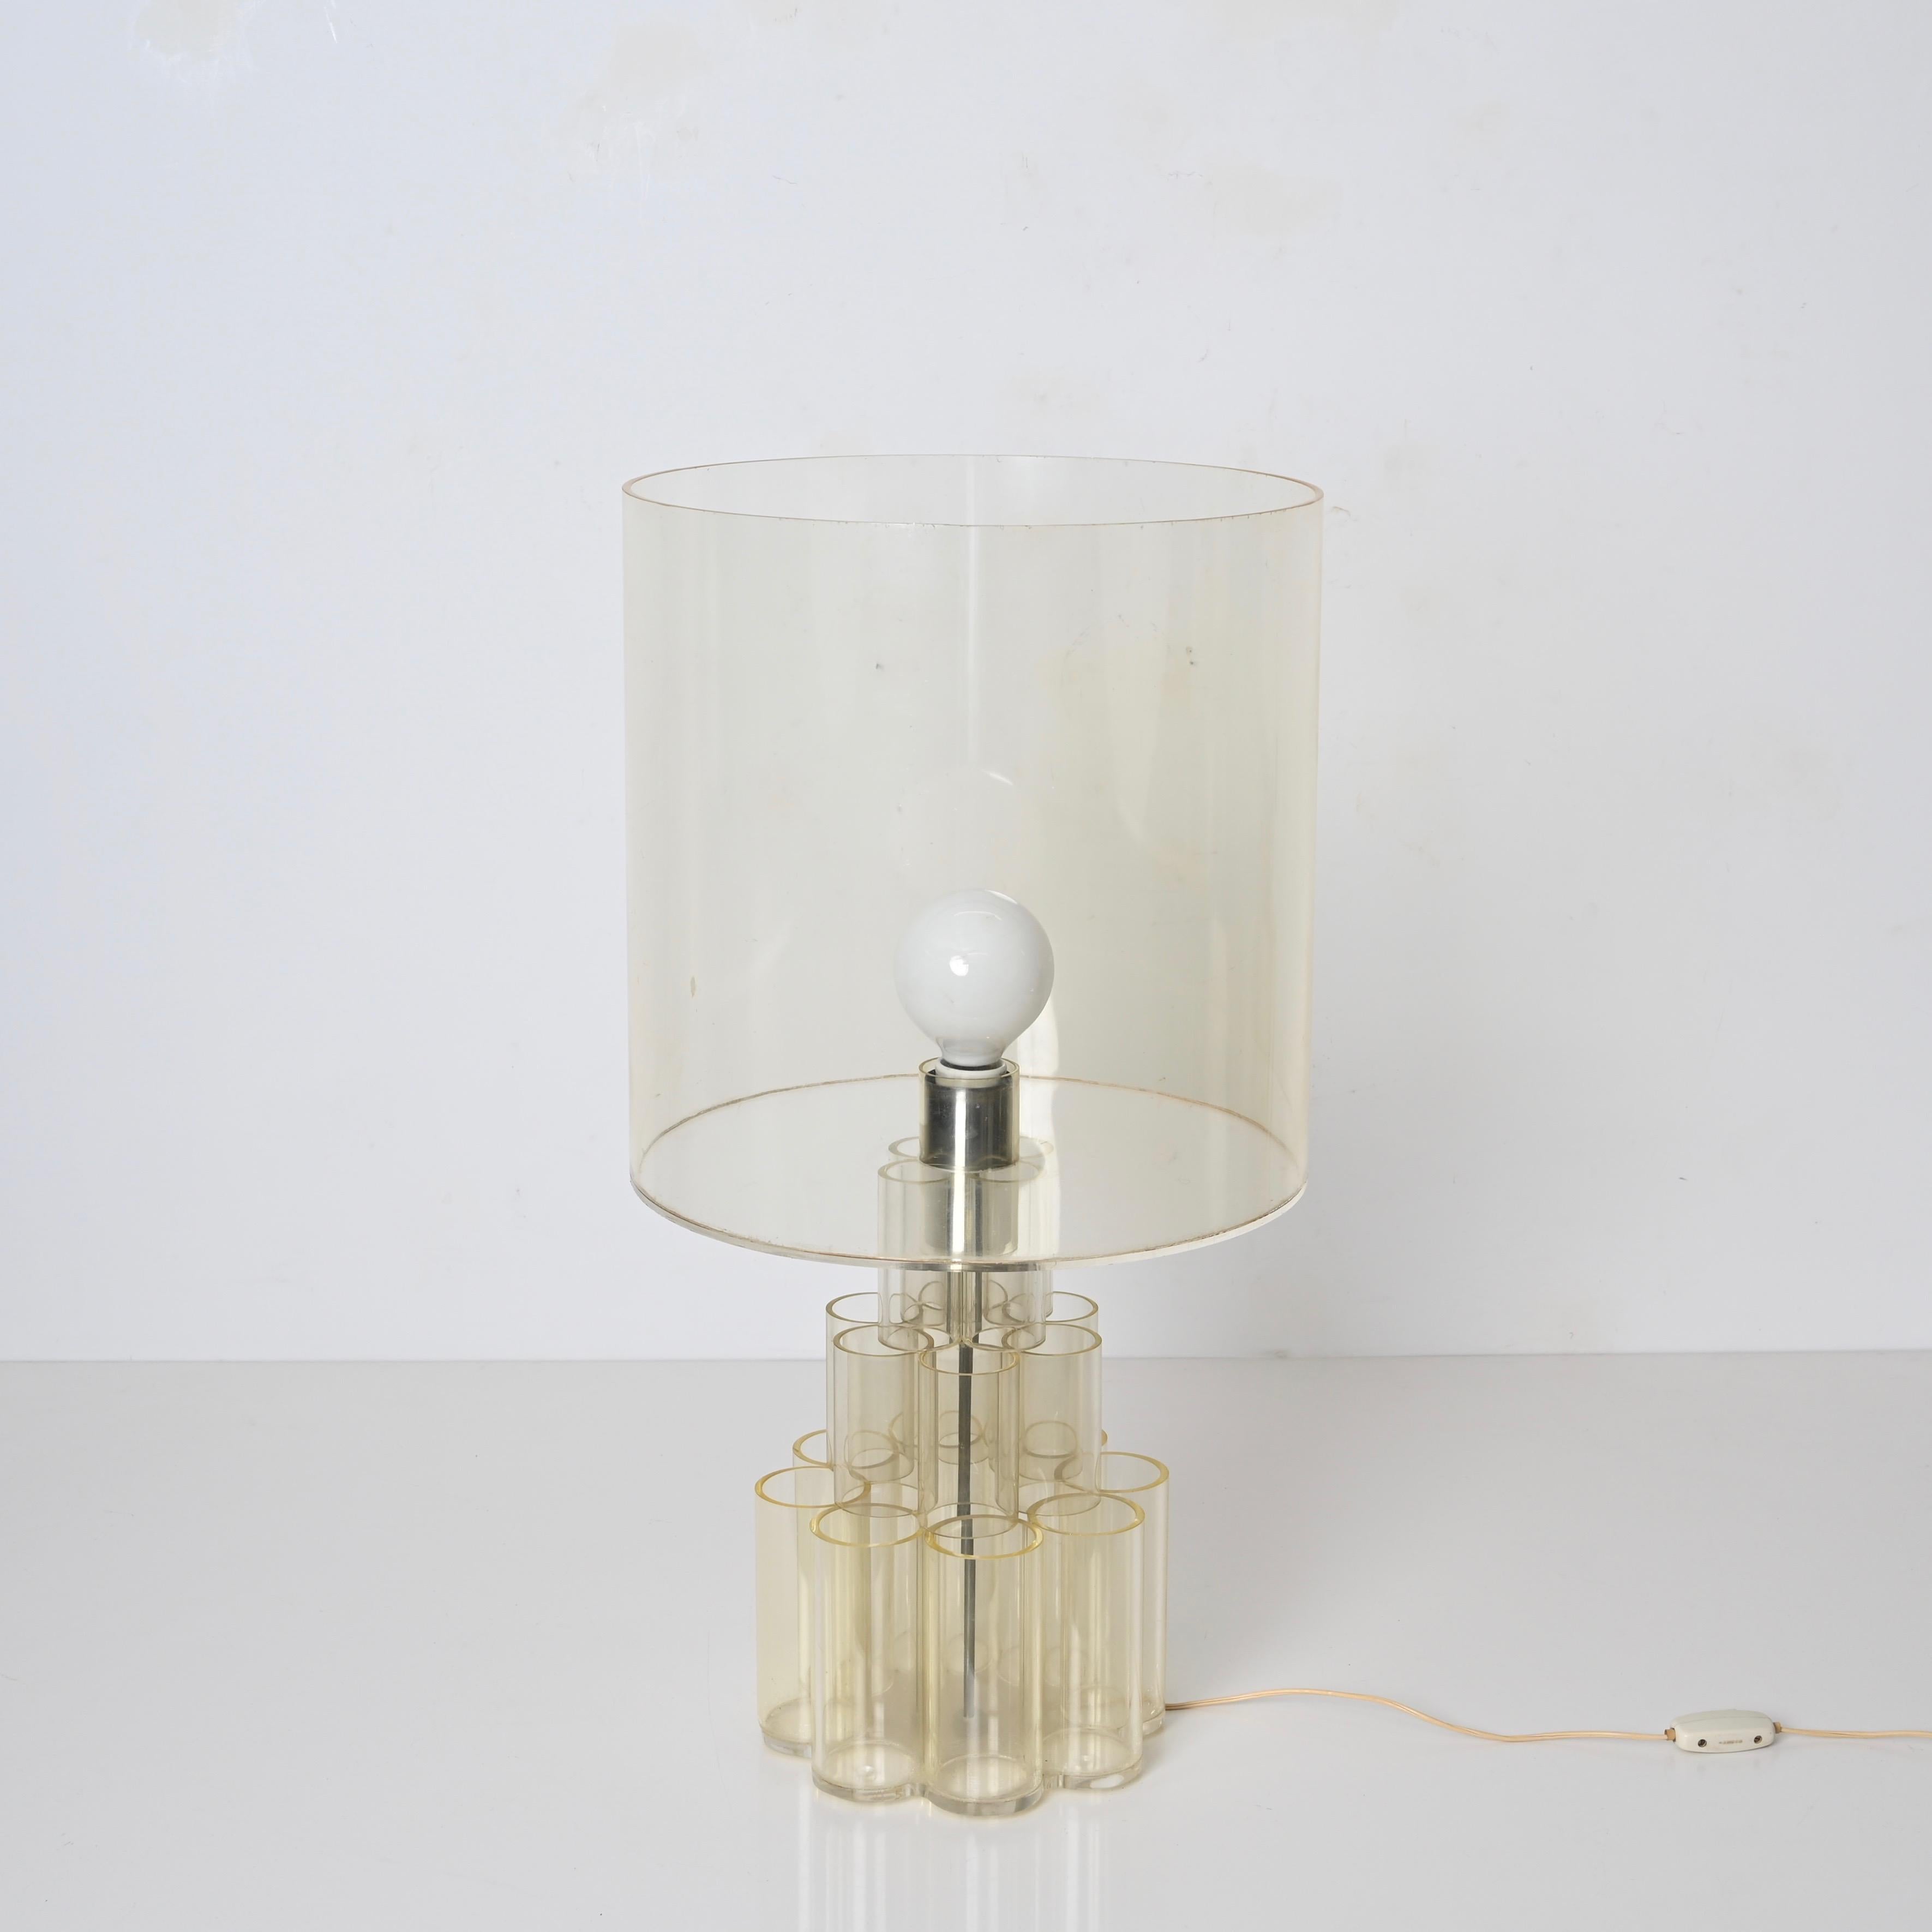 Mid-Century Modern Table Lamp in Lucite Plexiglass, Panton Style, Italy, 1970s For Sale 4